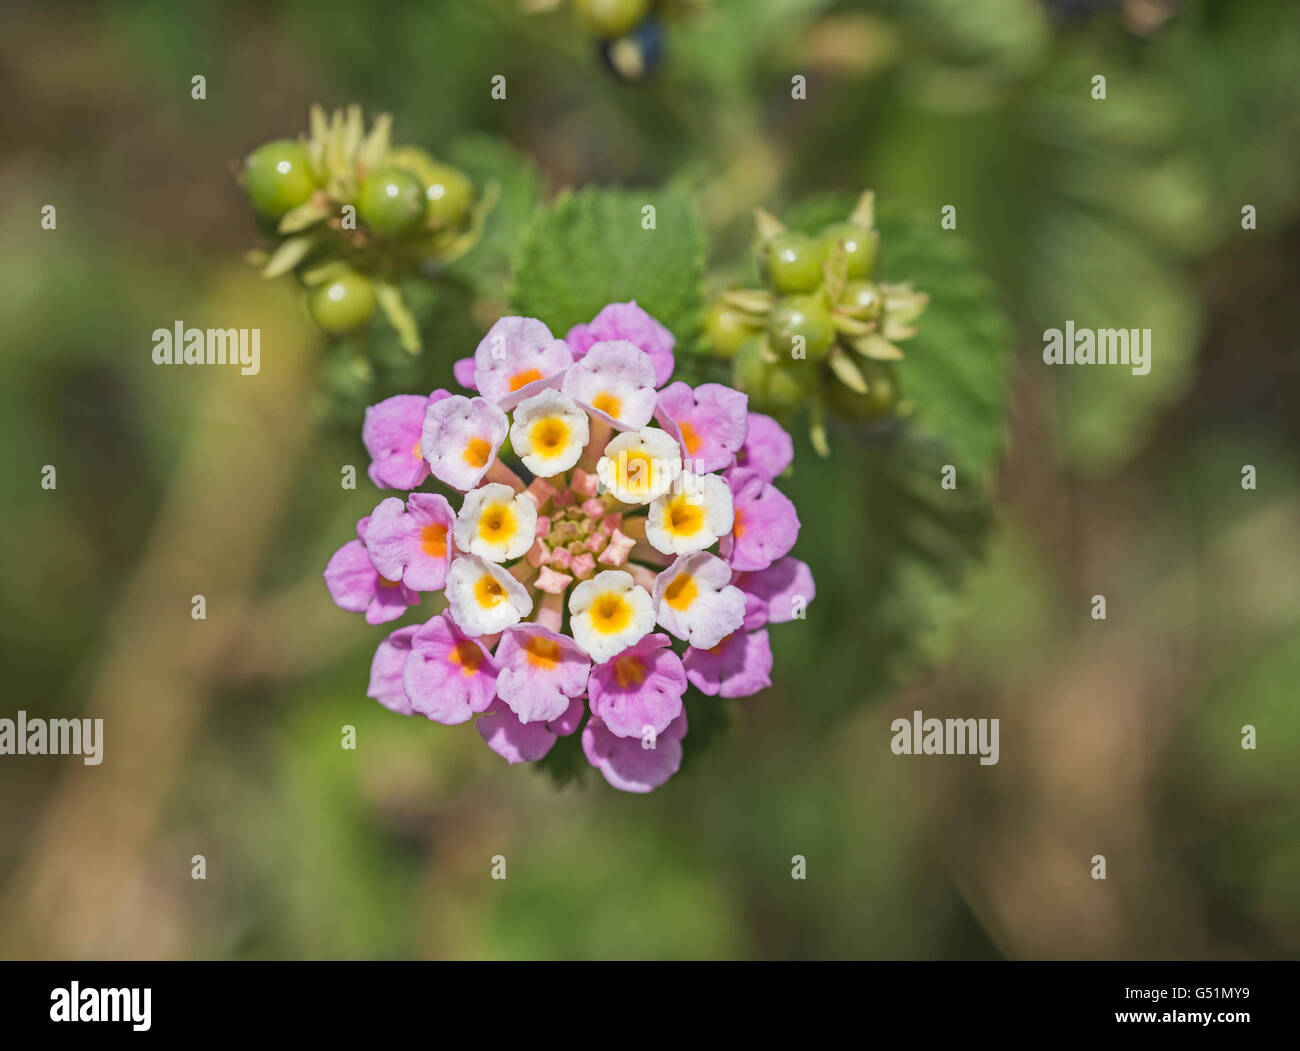 Closeup detail of white and pink lantana camara flower floret in garden with berries Stock Photo